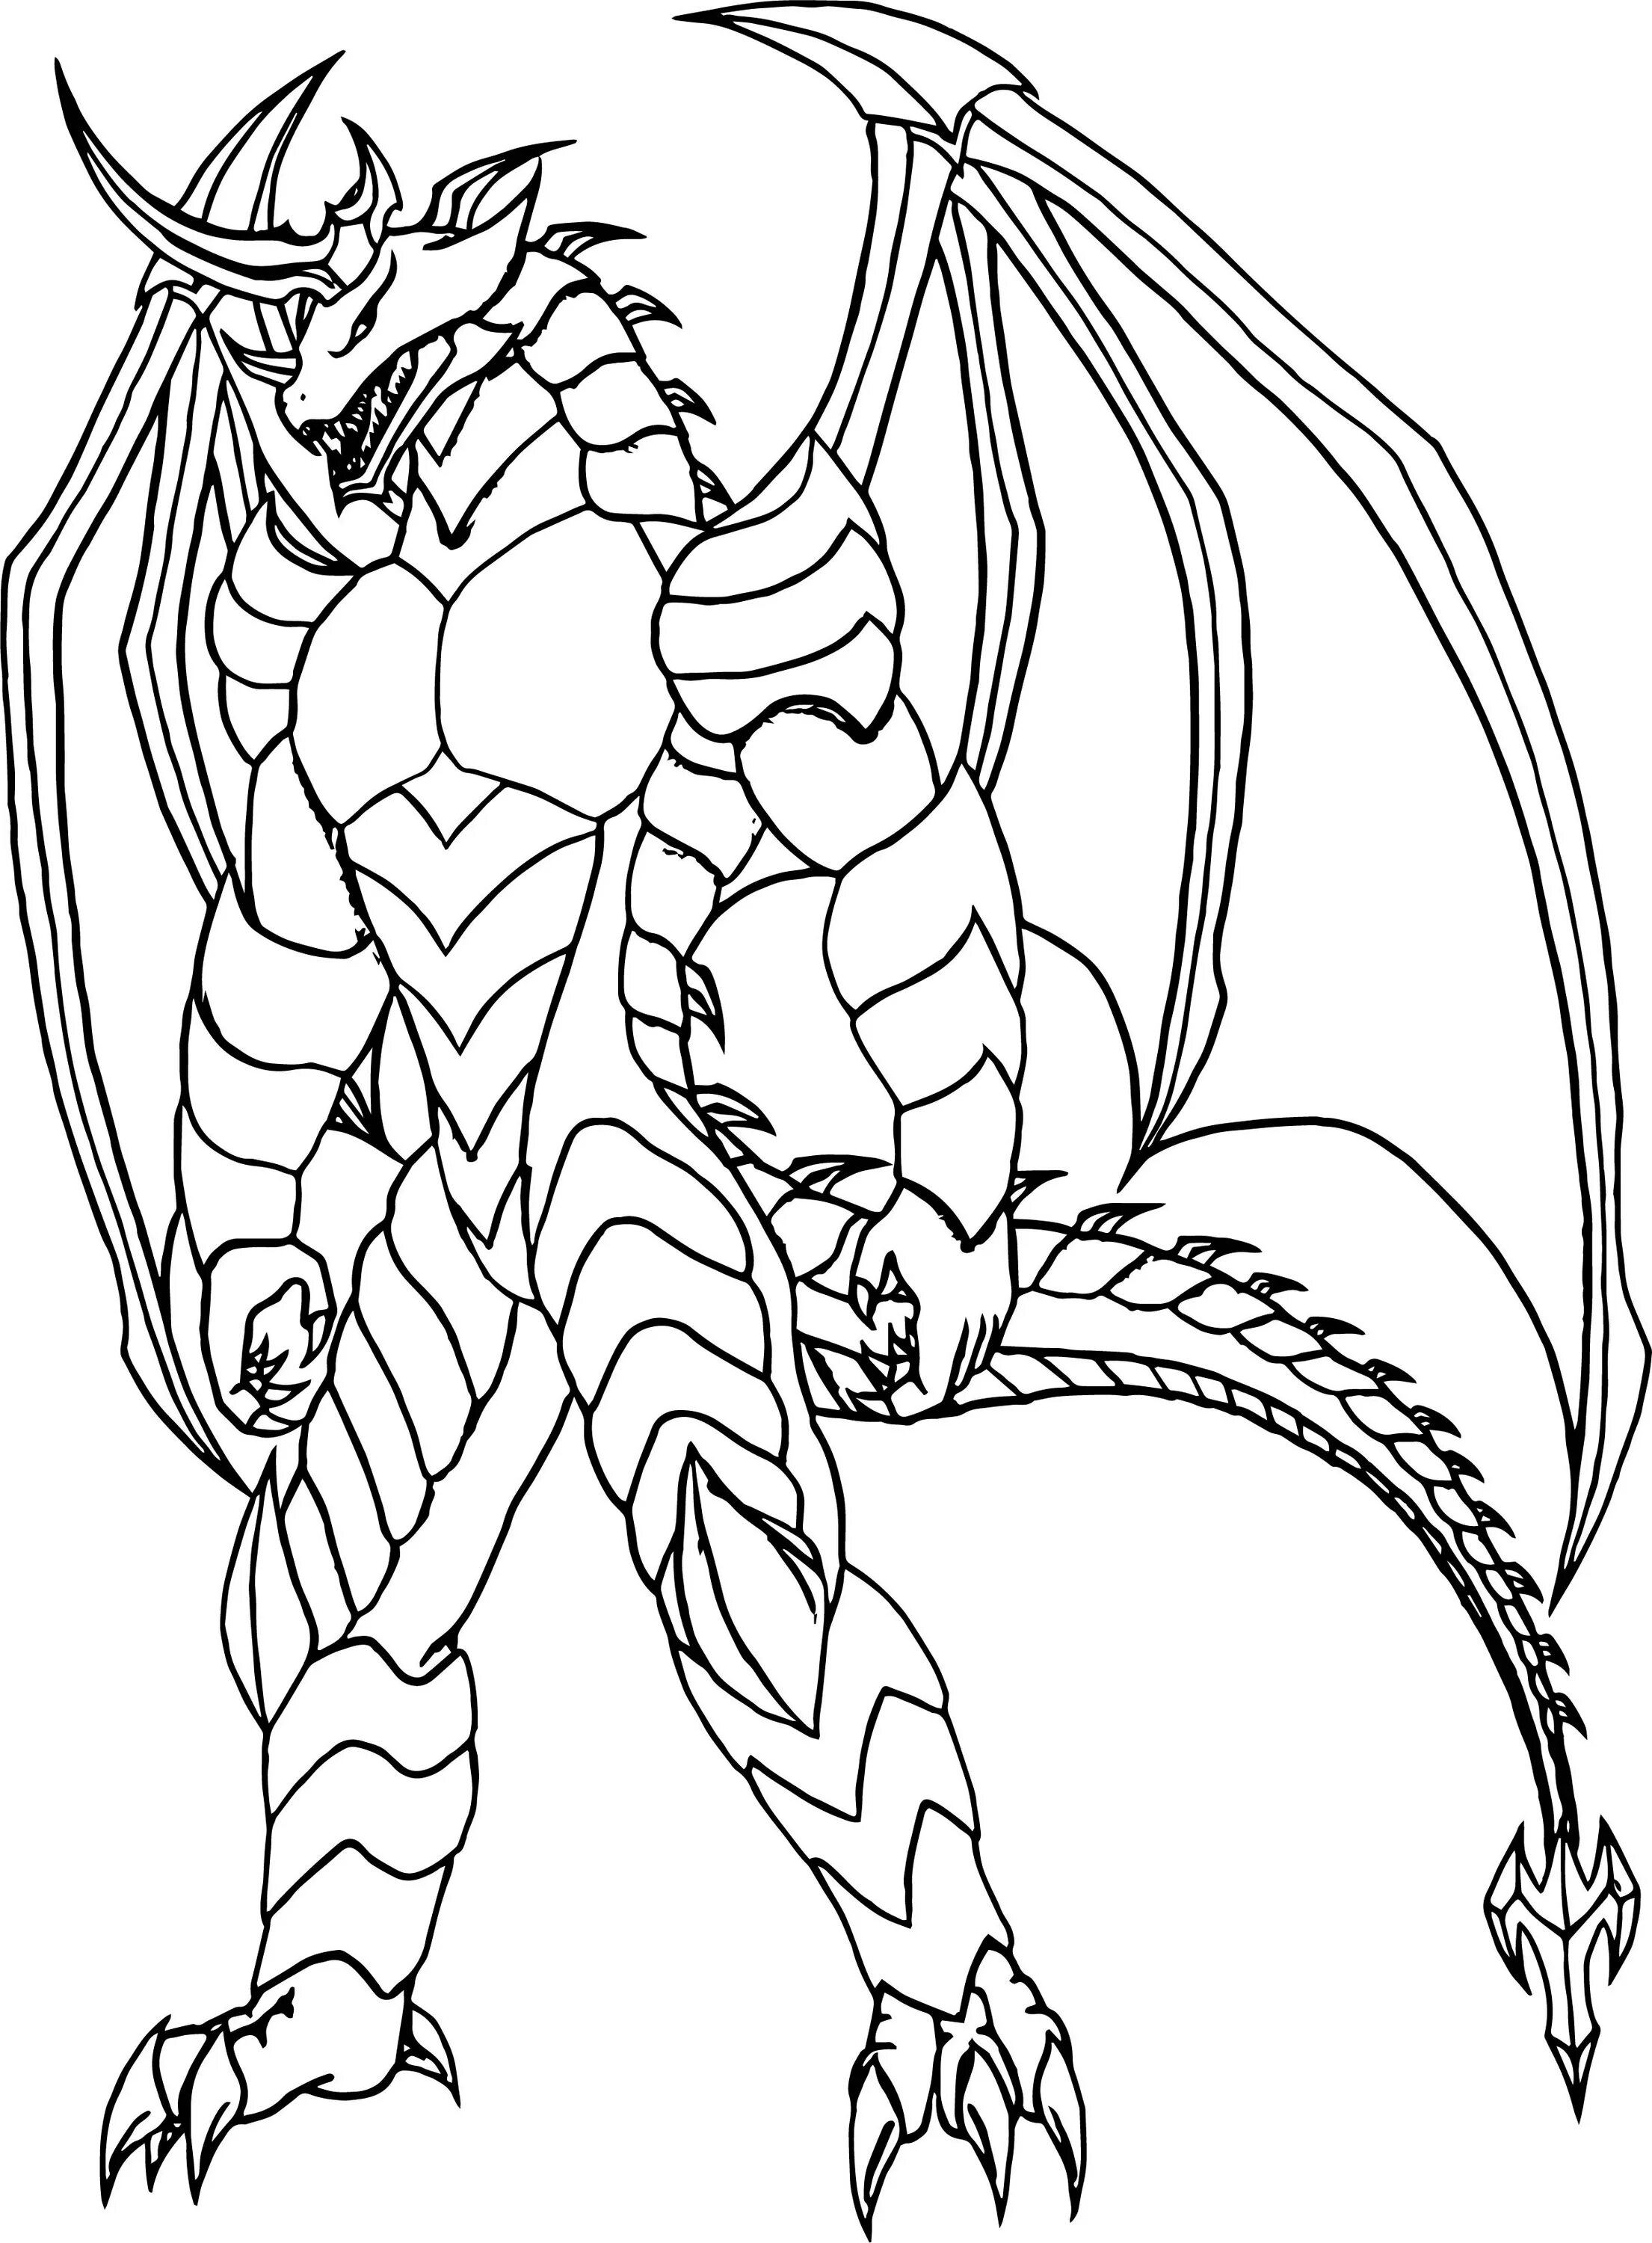 Siren-Headed Outstanding Robot Coloring Page